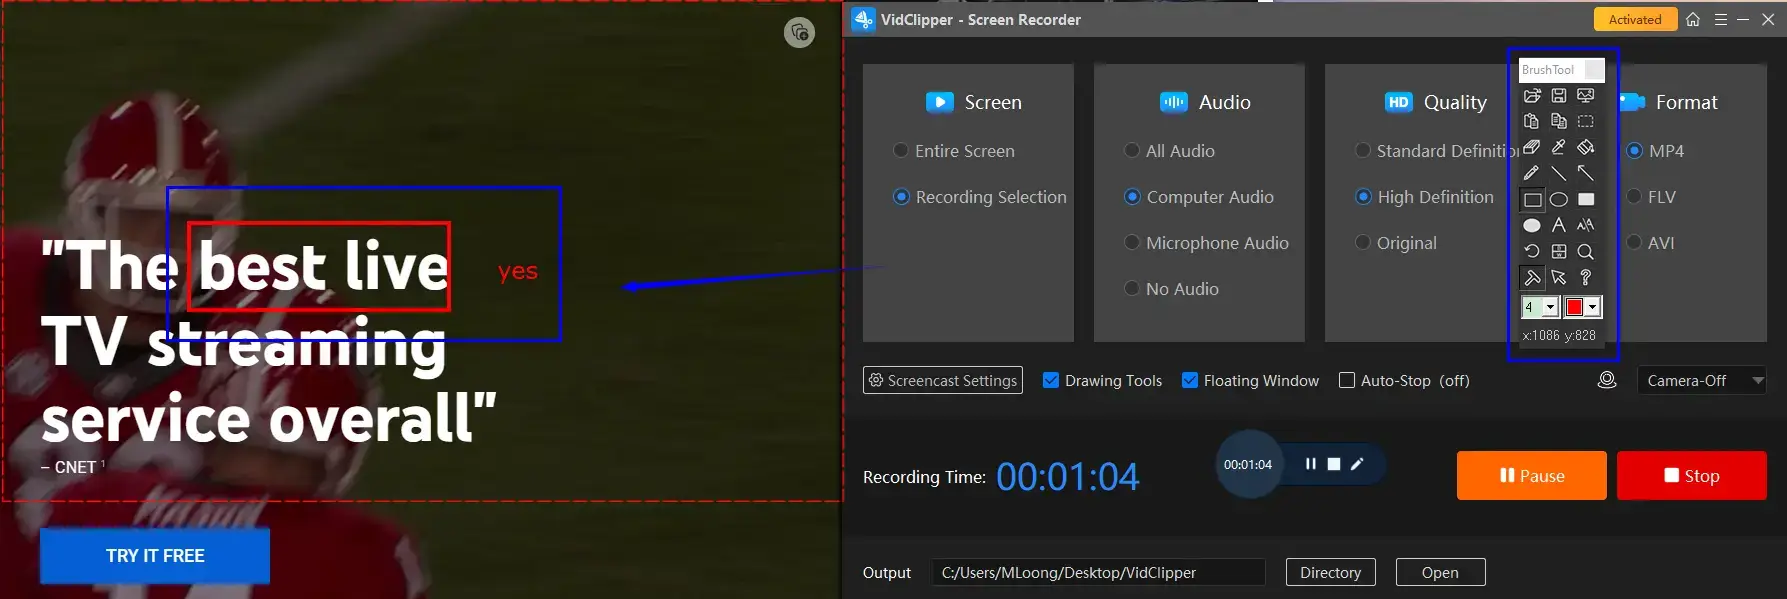 how to screen record protected videos on windows using workintool capture screen recorder drawing tool